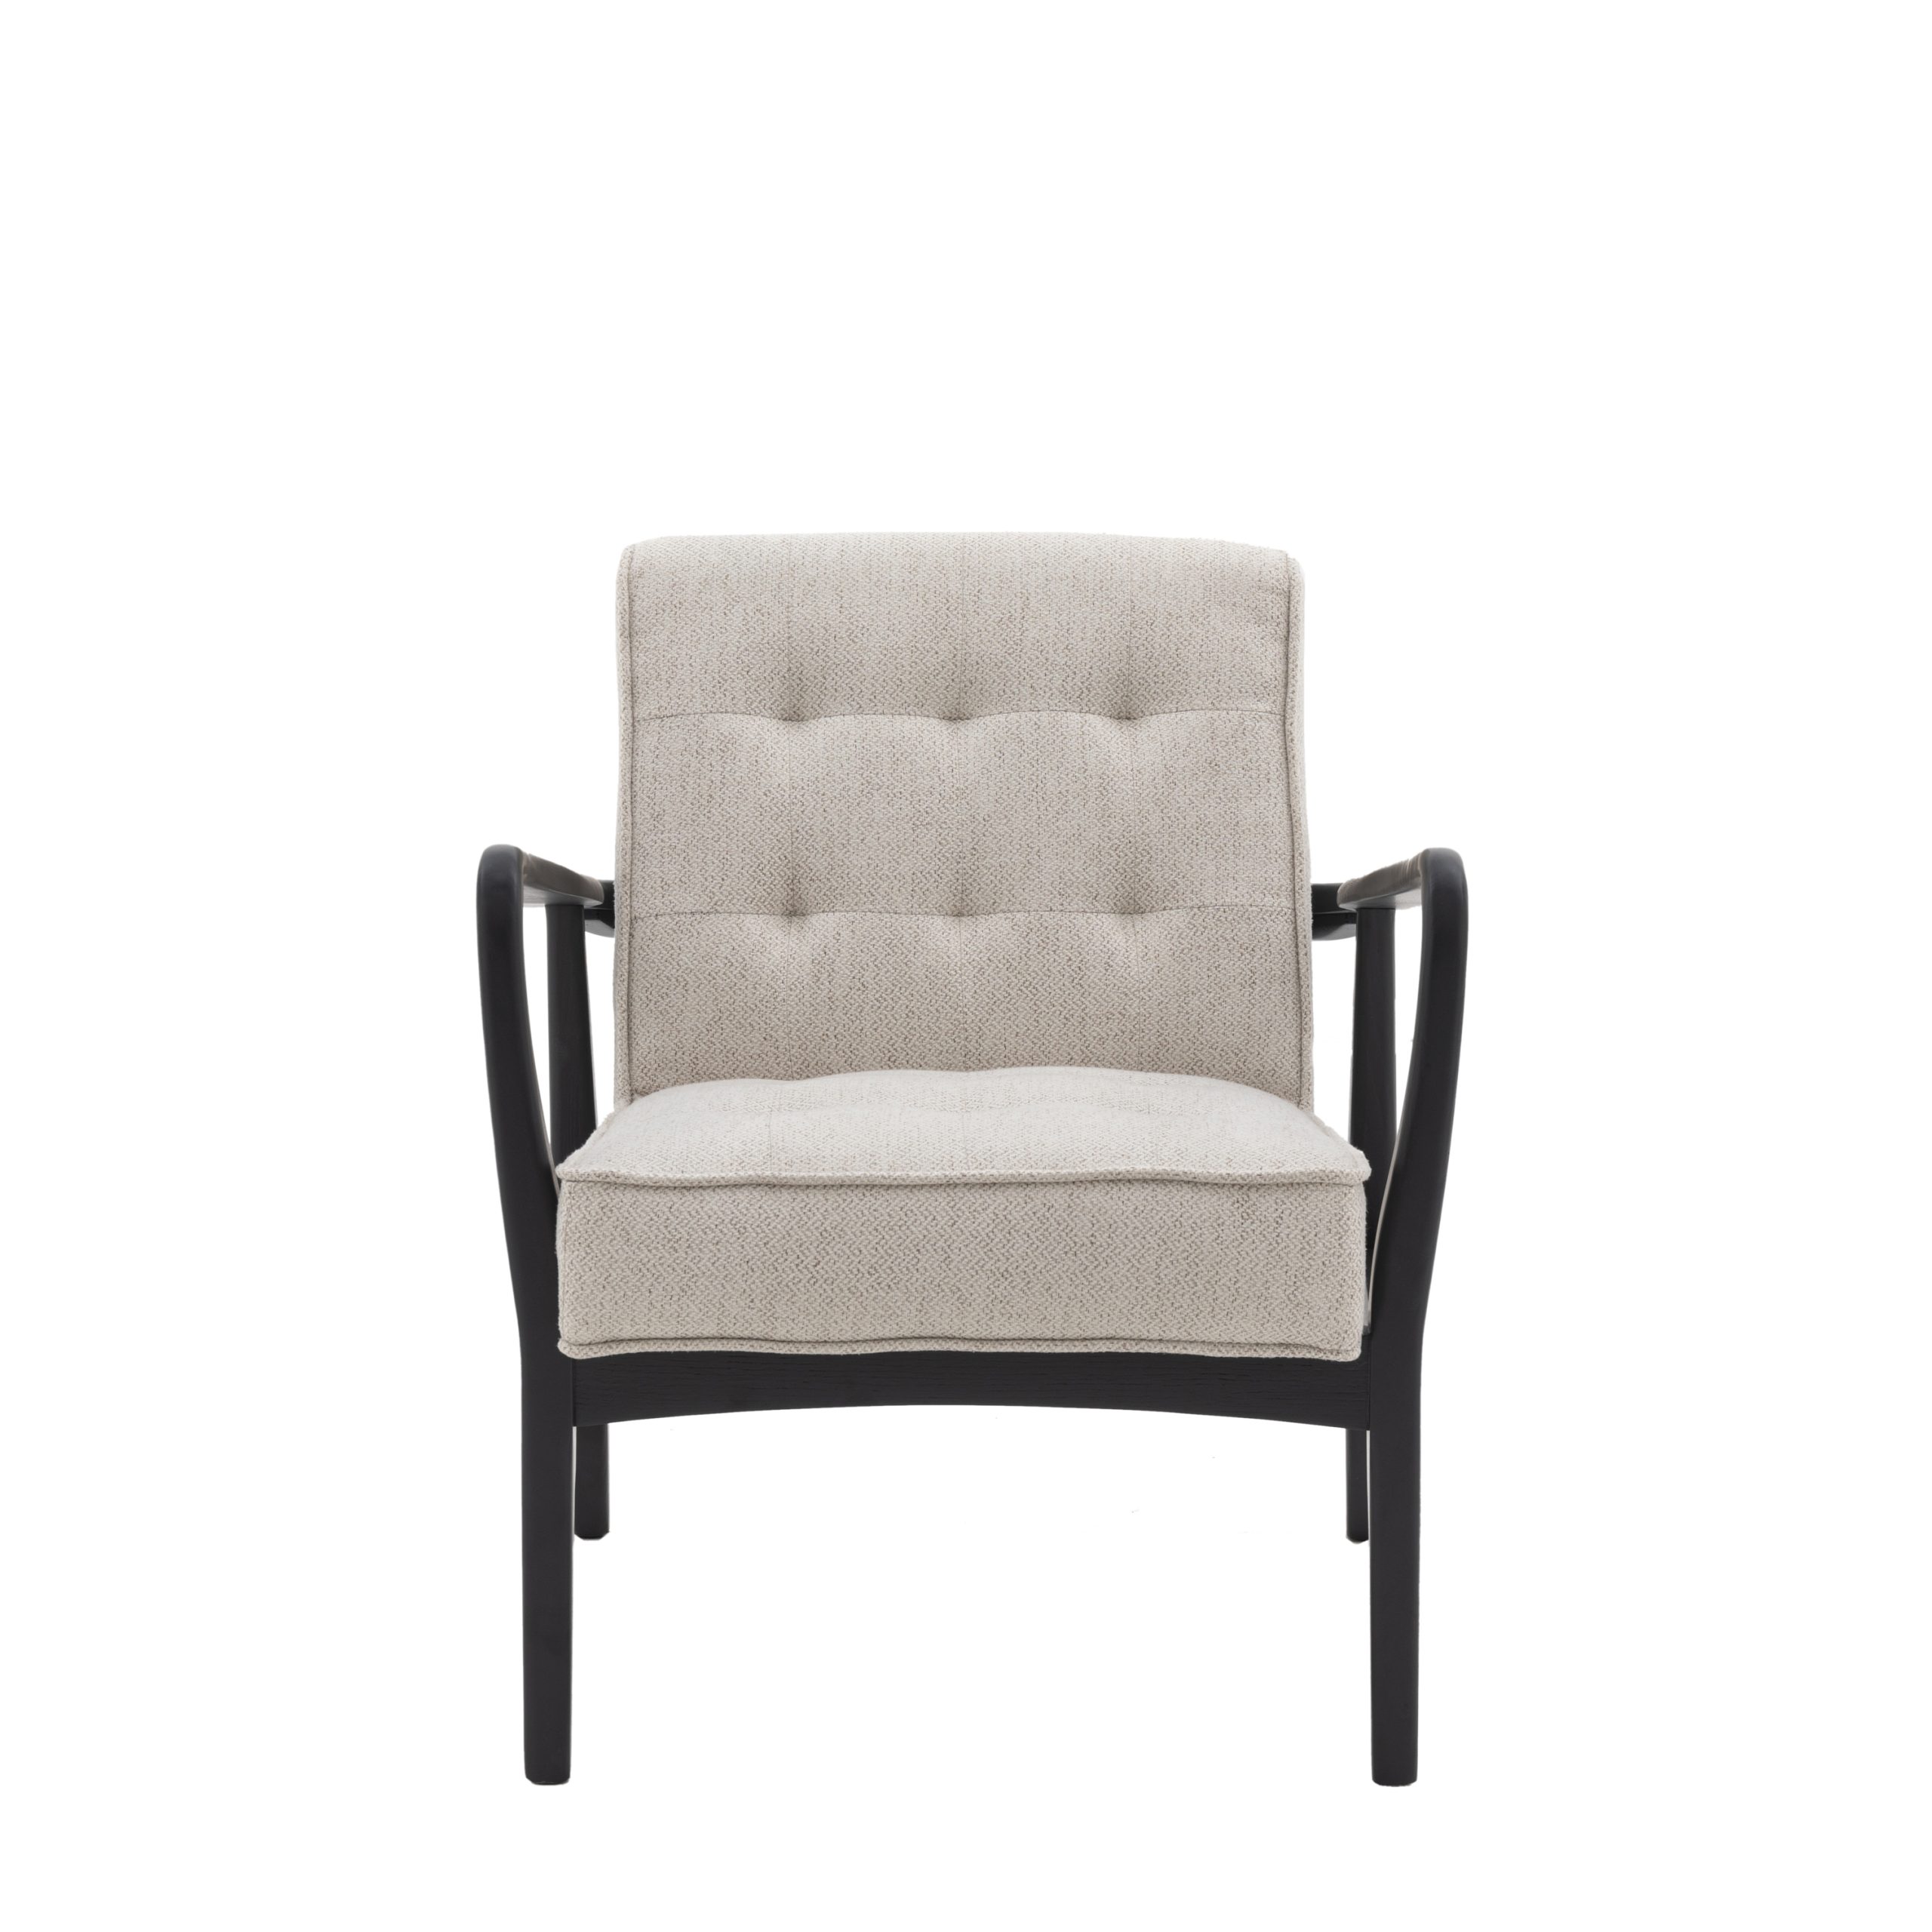 Gallery Direct Humber Armchair Natural Weave